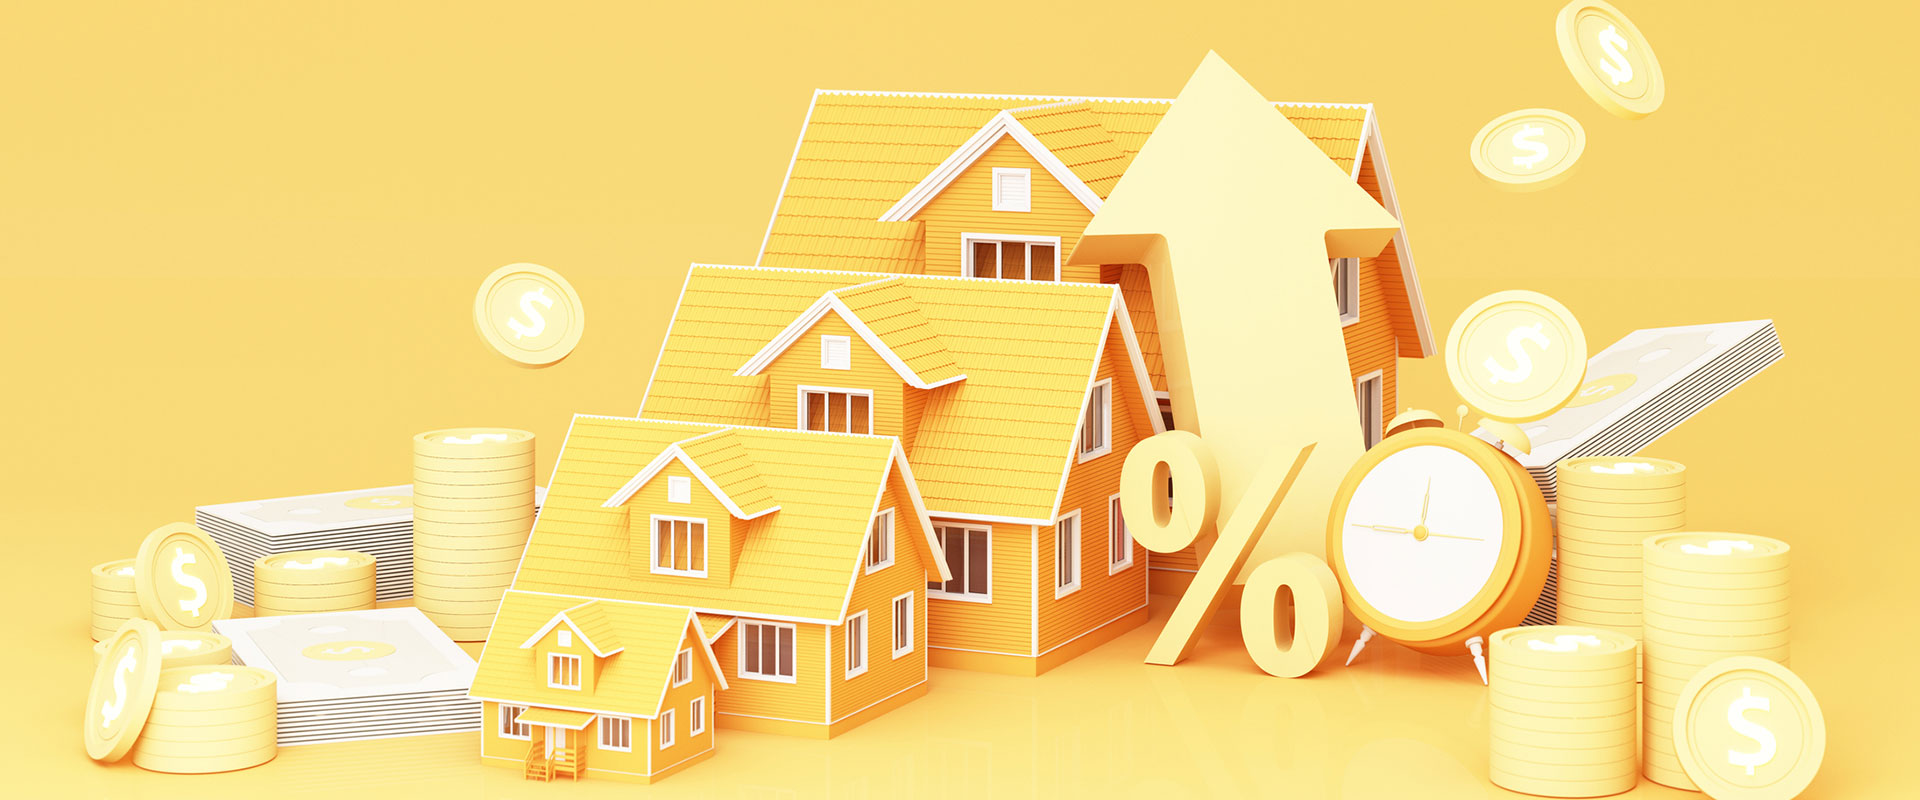 Everything You Need to Know About Getting the Best Mortgage Rates